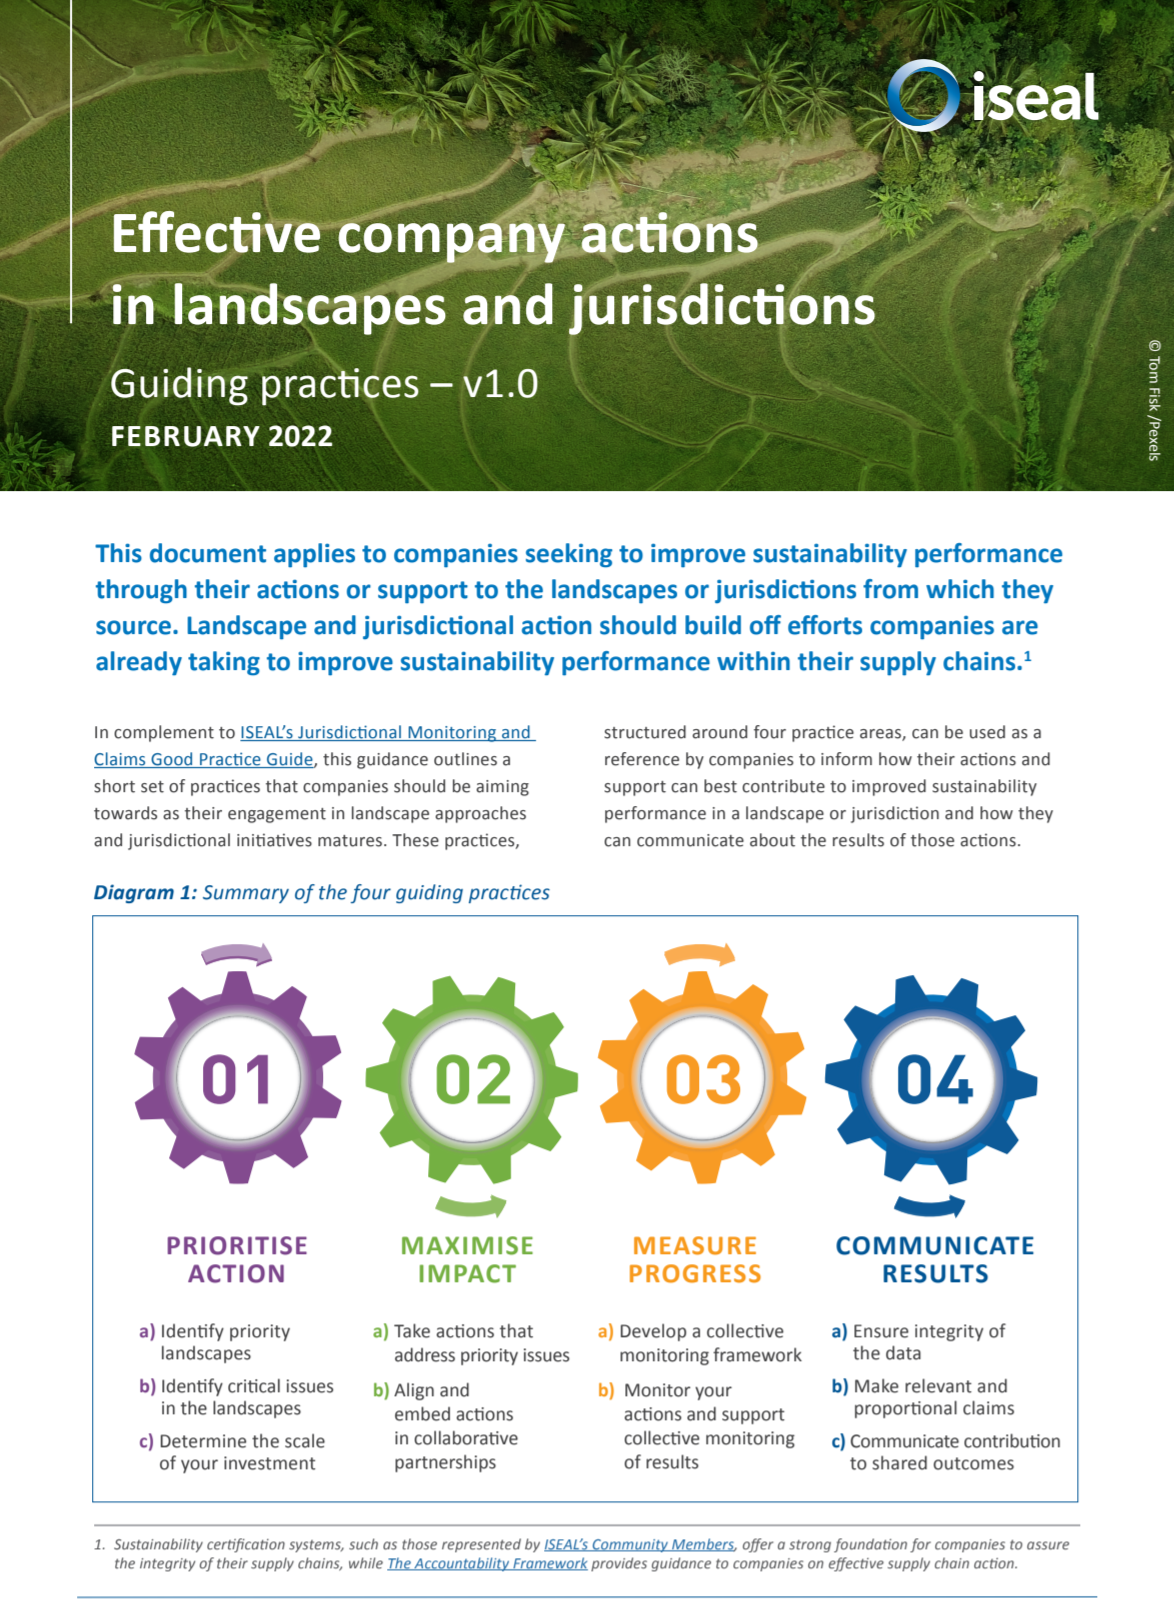 Effective Company Actions in Landscapes and Jurisdictions: Guiding Practices